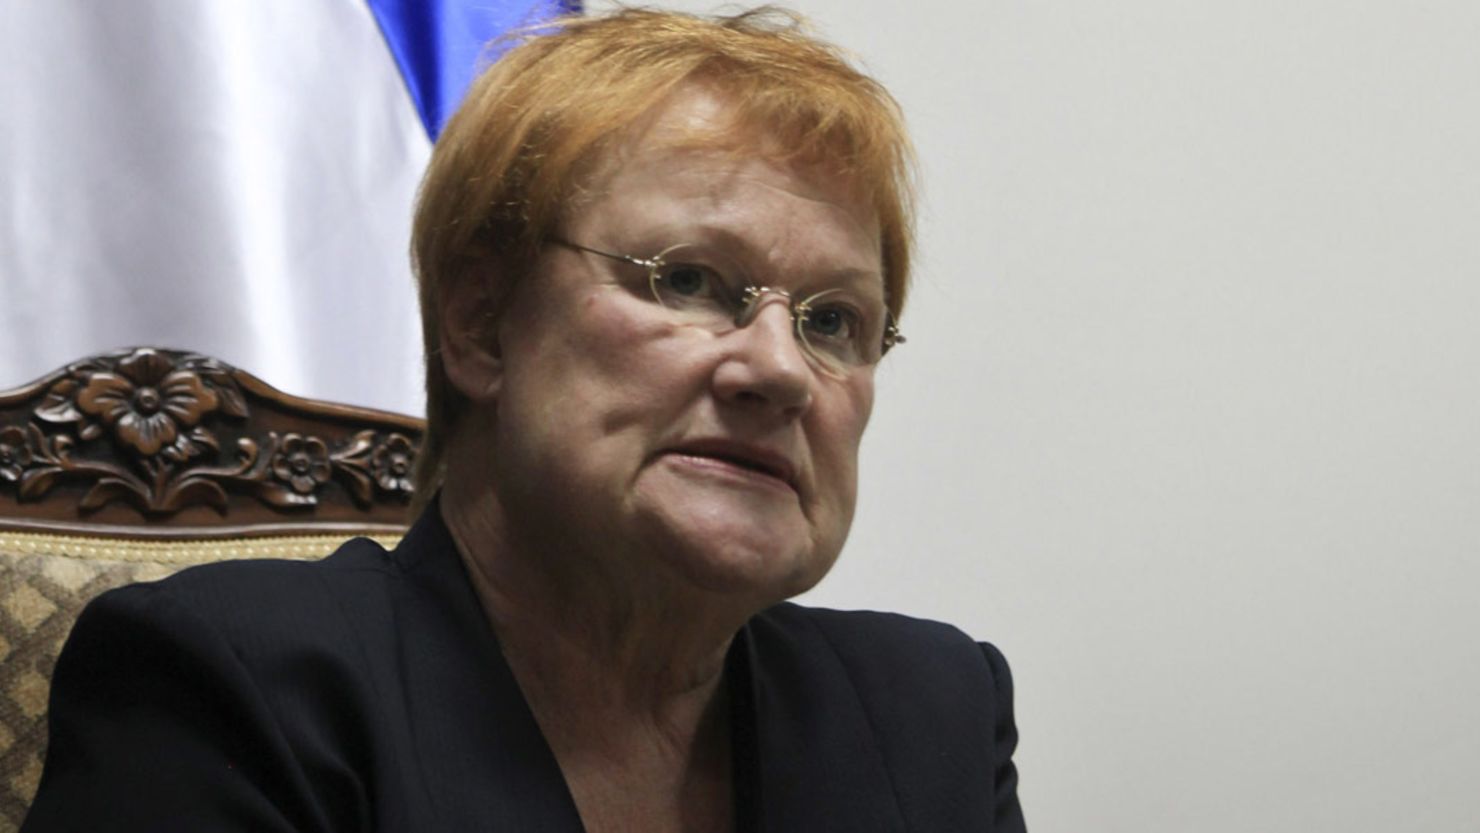 Social Democrat Tarja Halonen is stepping down after serving the maximum two terms as Finland's president.